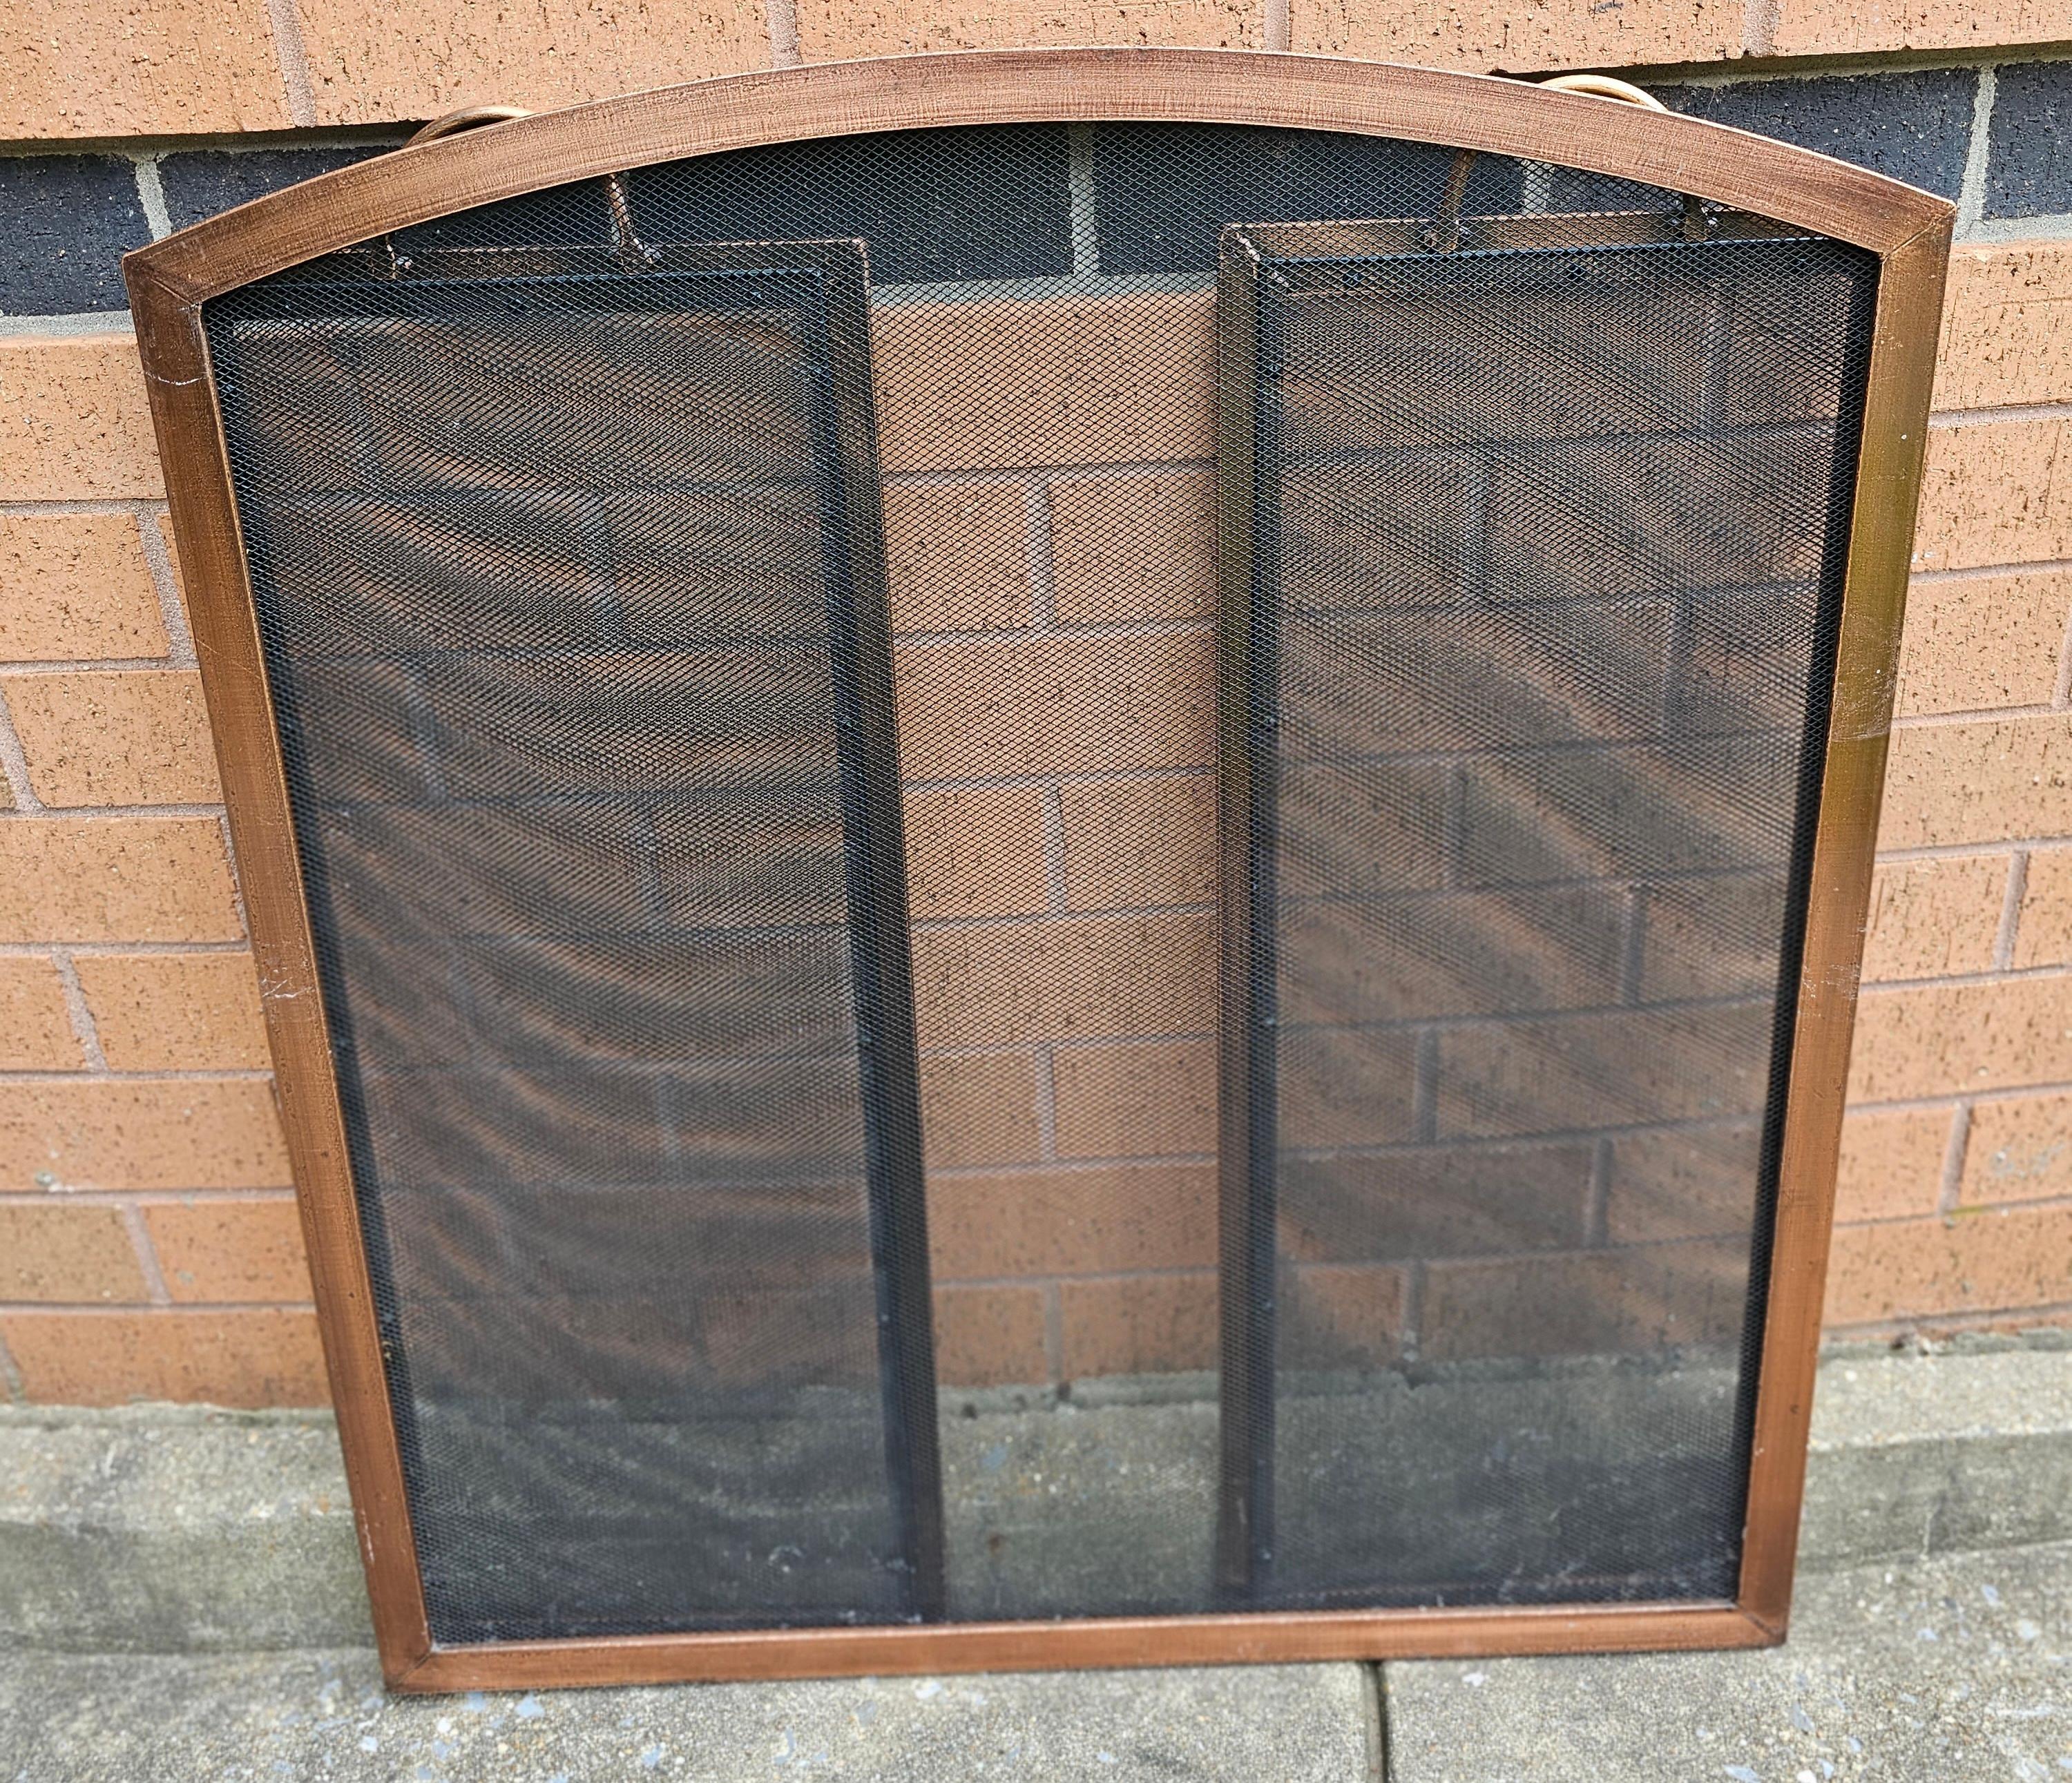 A 20th Century Copper and wire mesh Trifold Fireplace Screen. Patinated Antique copper finishand Steel construction
Comes with Large 3-panel design to accommodate larger fireplaces and Integrated handles make tending fires easy.
Measures 54